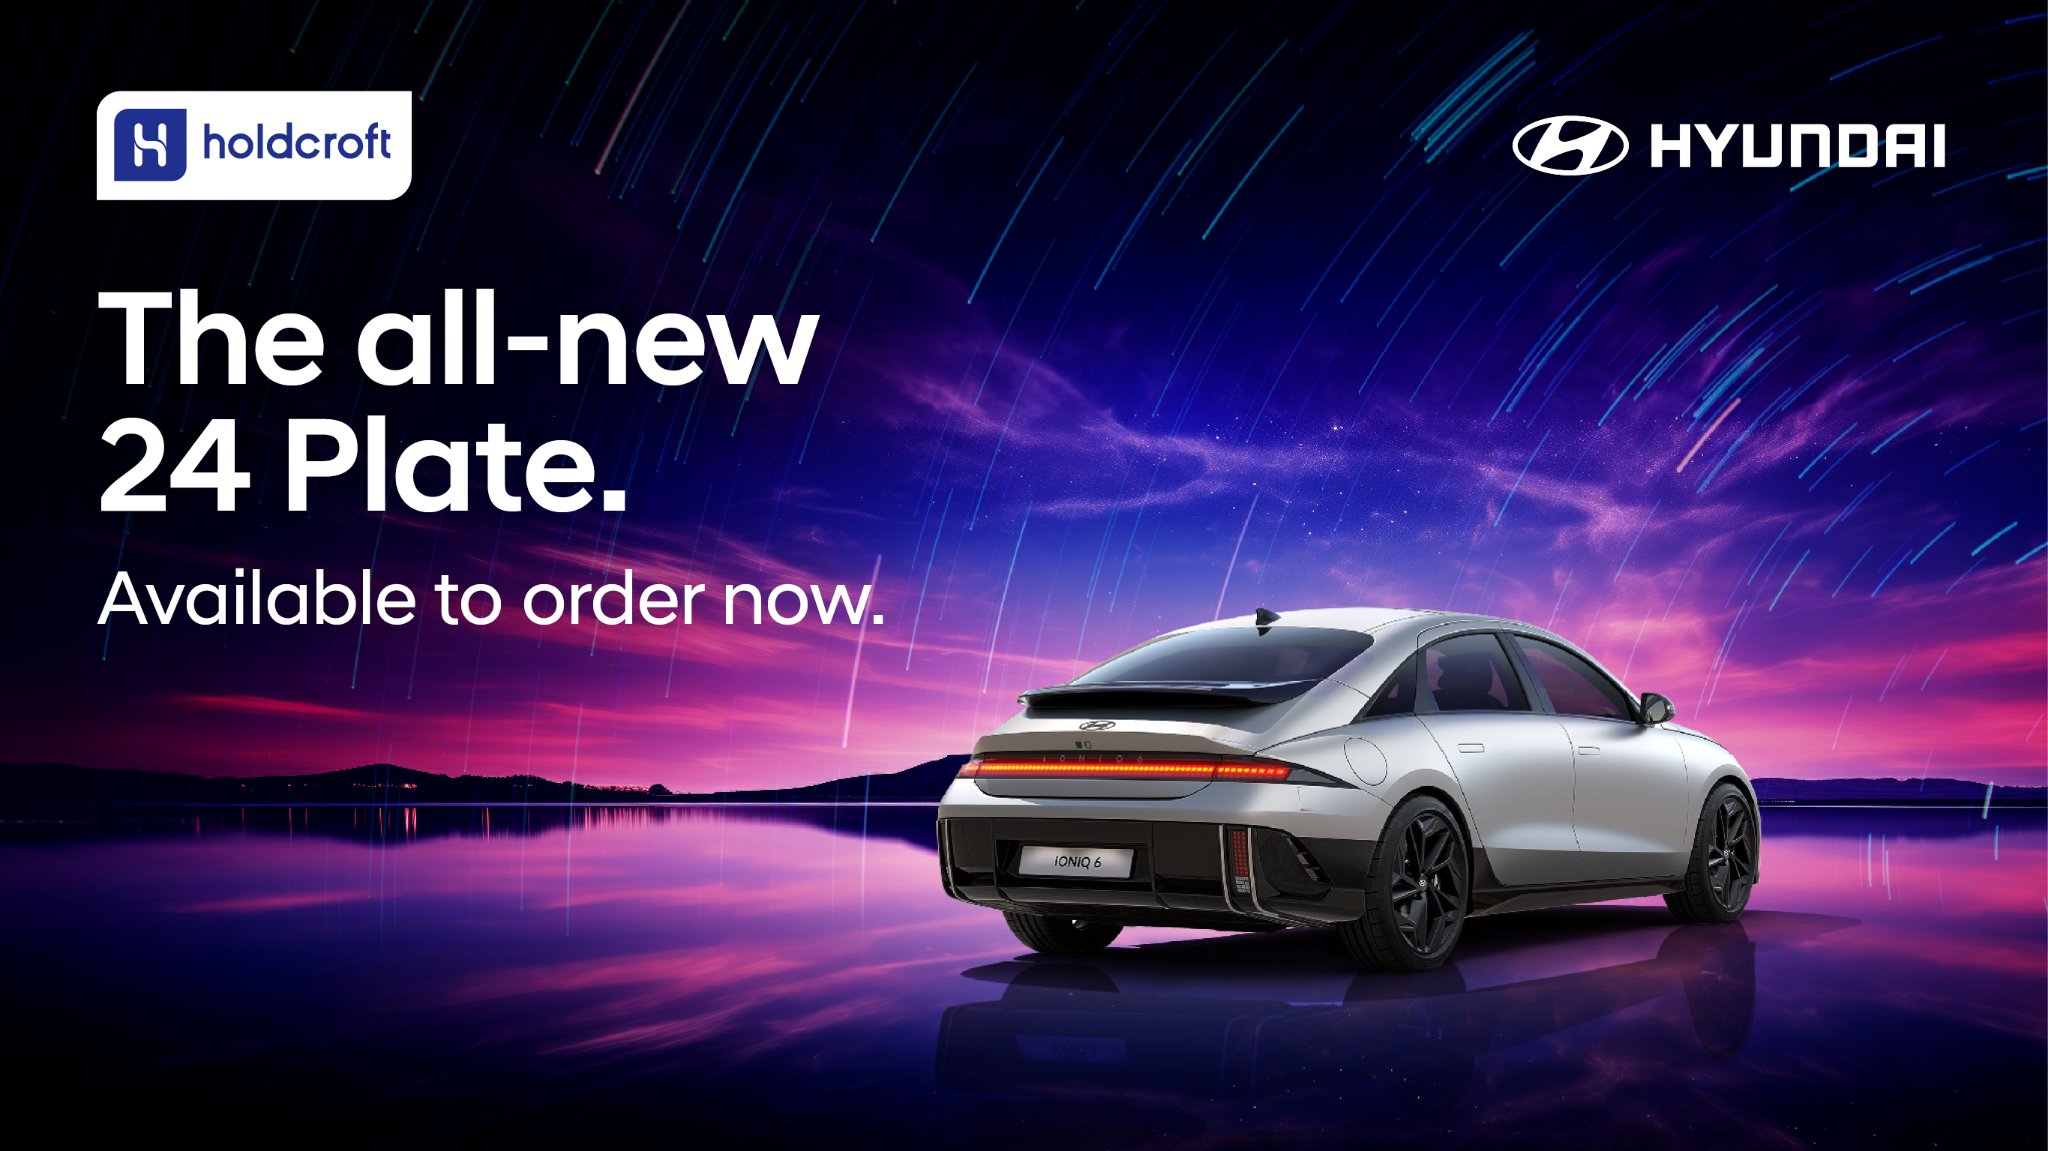 The all-new 24 Plate: Available to order now